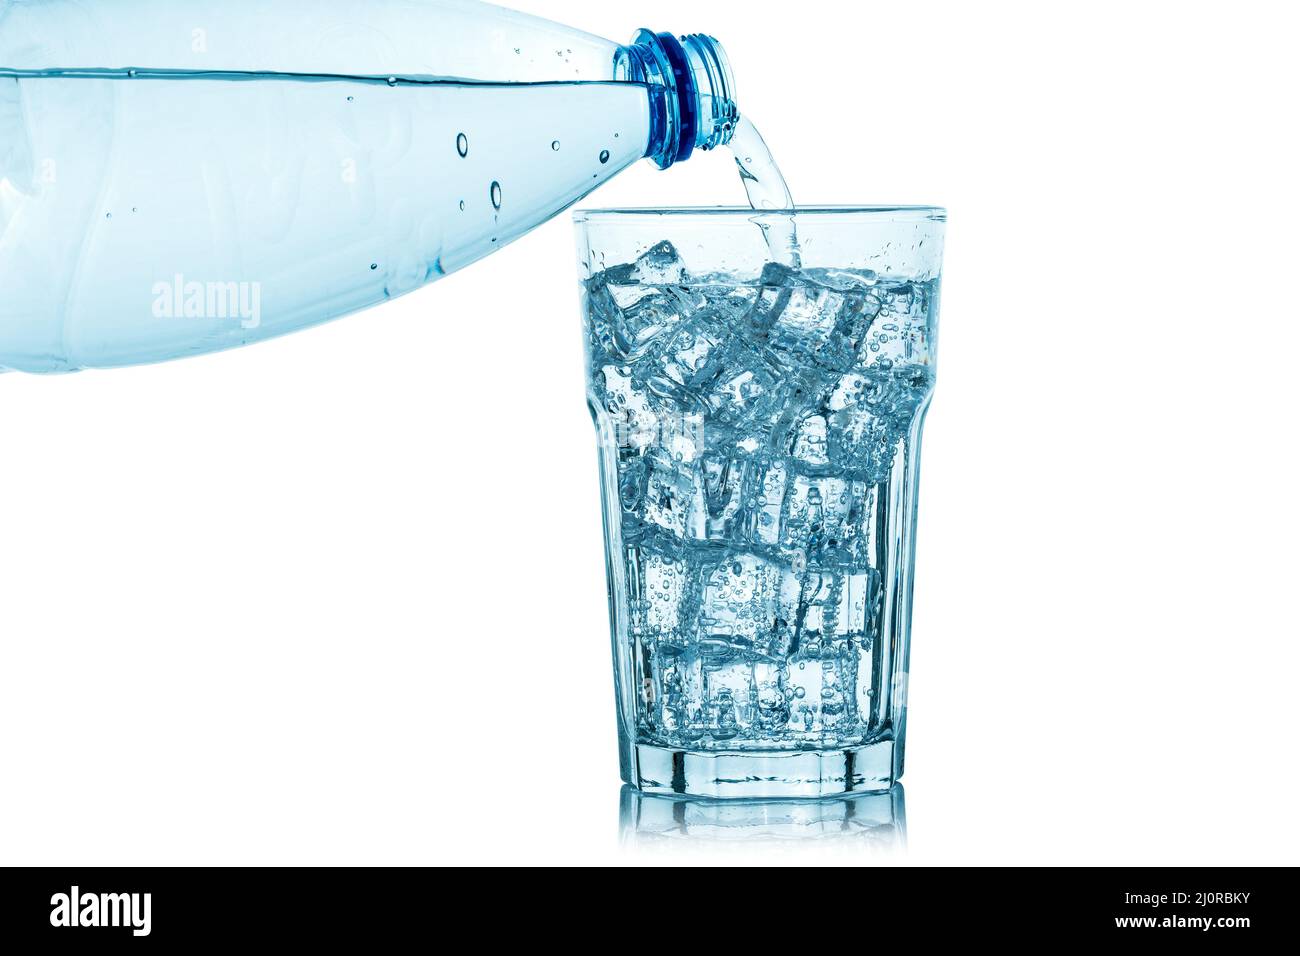 https://c8.alamy.com/comp/2J0RBKY/close-up-pouring-purified-fresh-drink-water-from-the-bottle-2J0RBKY.jpg